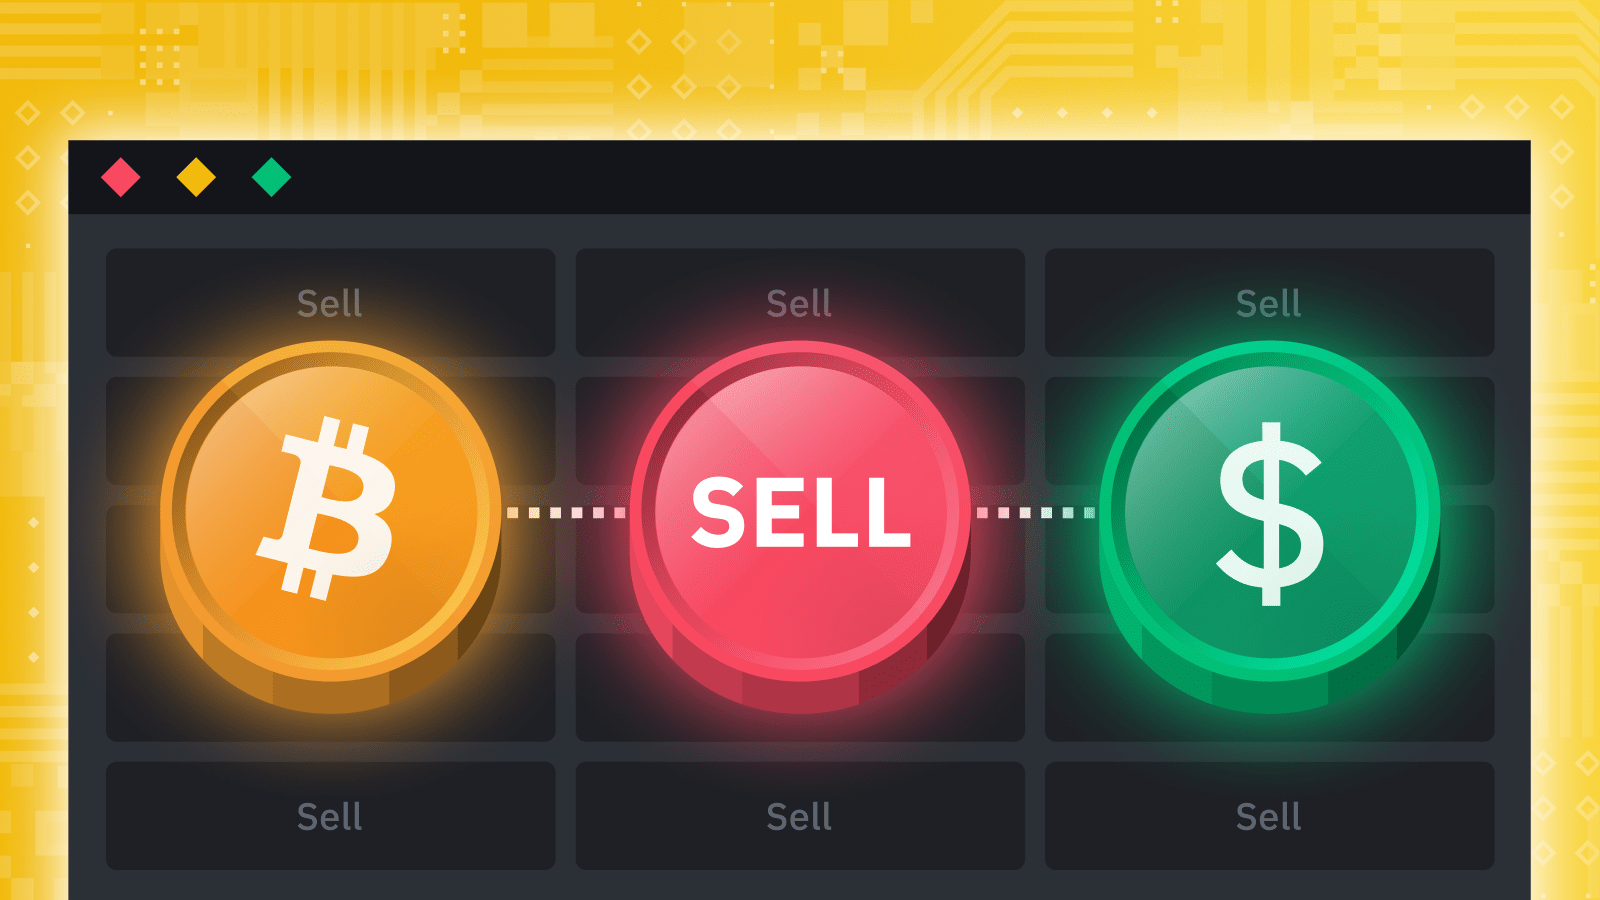 How to Sell Bitcoin Quickly Using Over-the-Counter Method